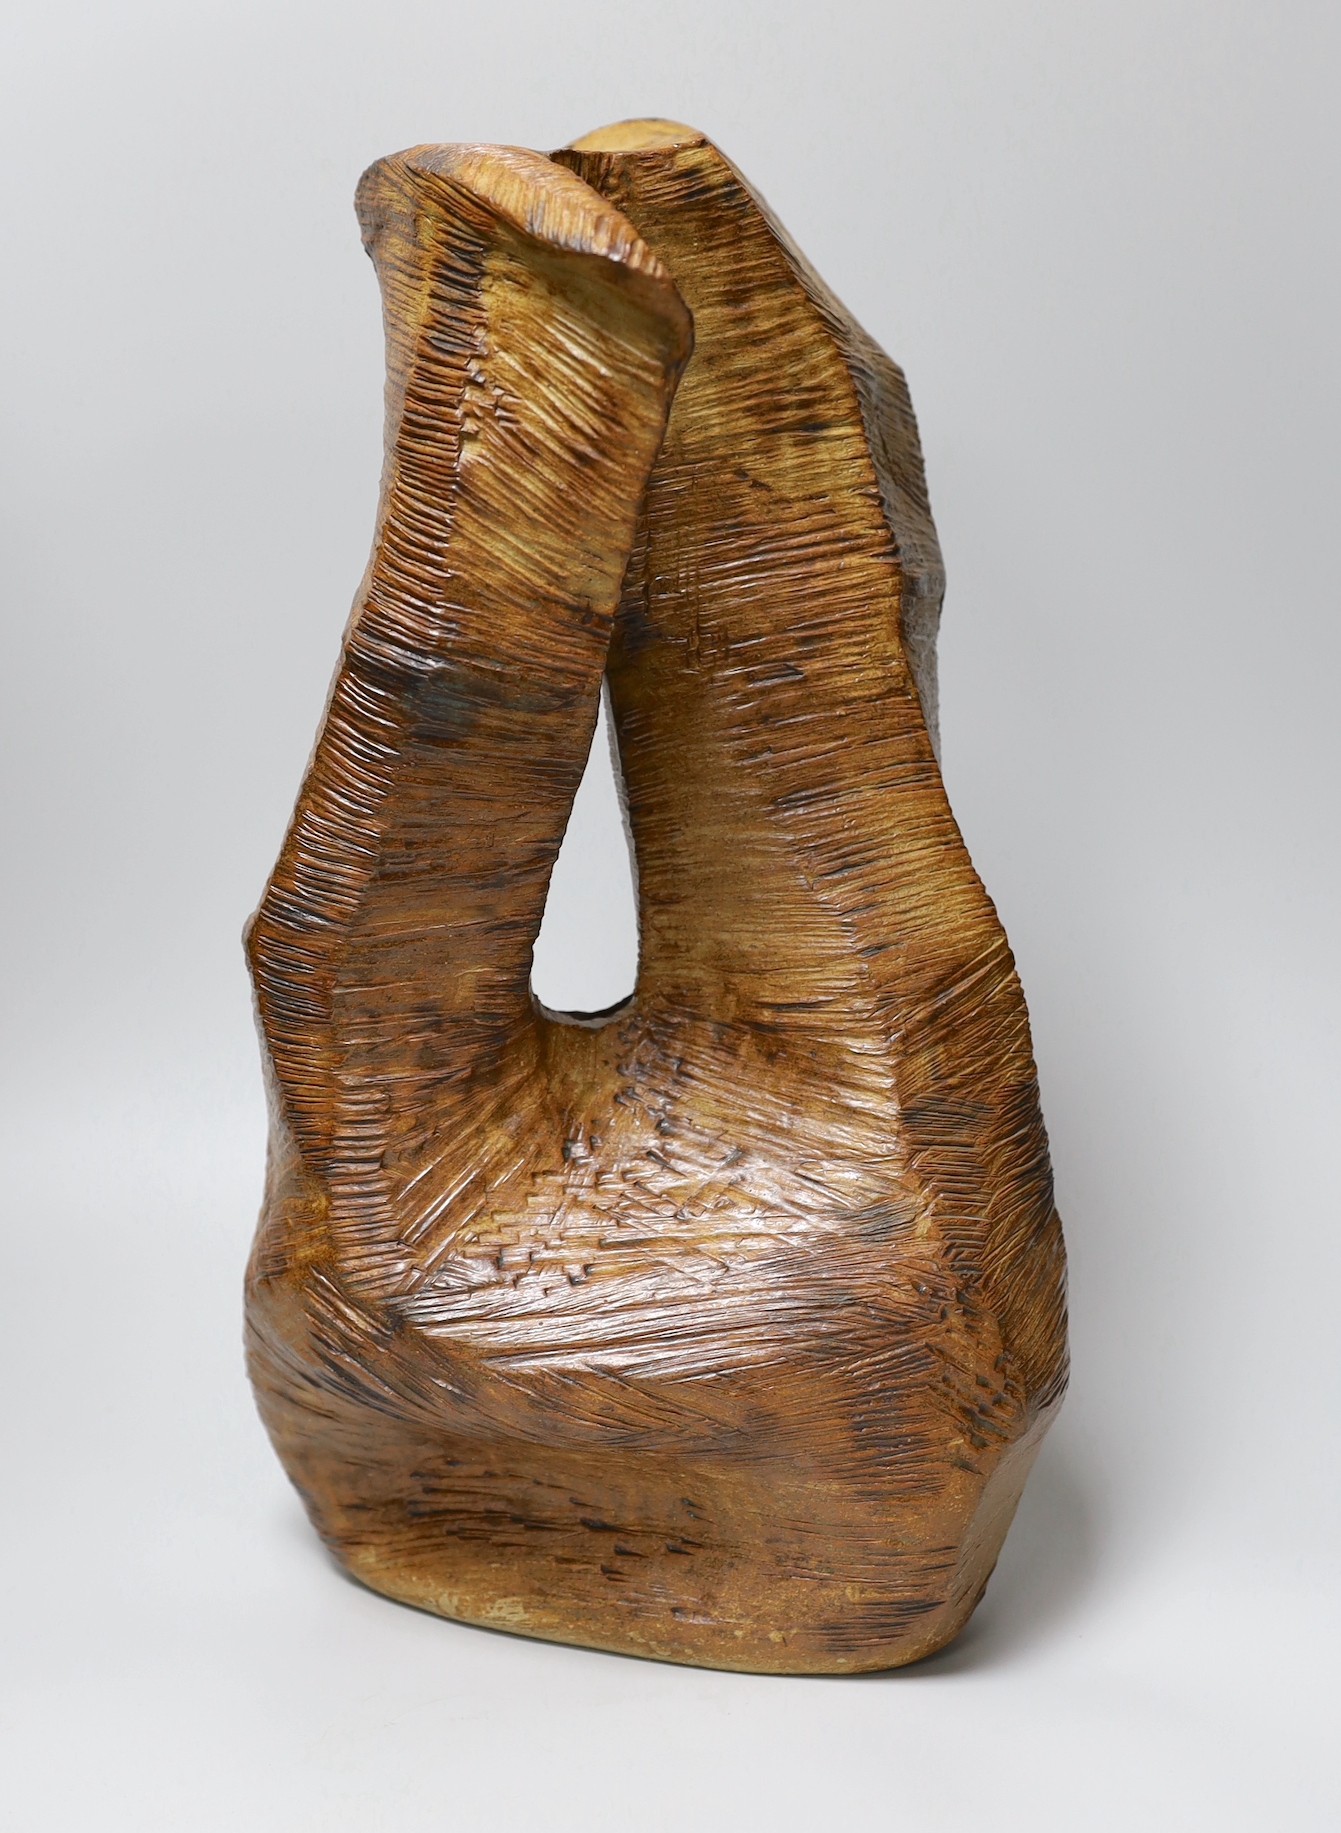 Ruth Sulke - a large brown copper glazed stoneware angular “wooden” sculpture with central hole, 1985, 42cm, See Sulke, Ruth - Ceramic Sculpture by Ruth Sulke, Hanart 2 Gallery, 1987, page 30